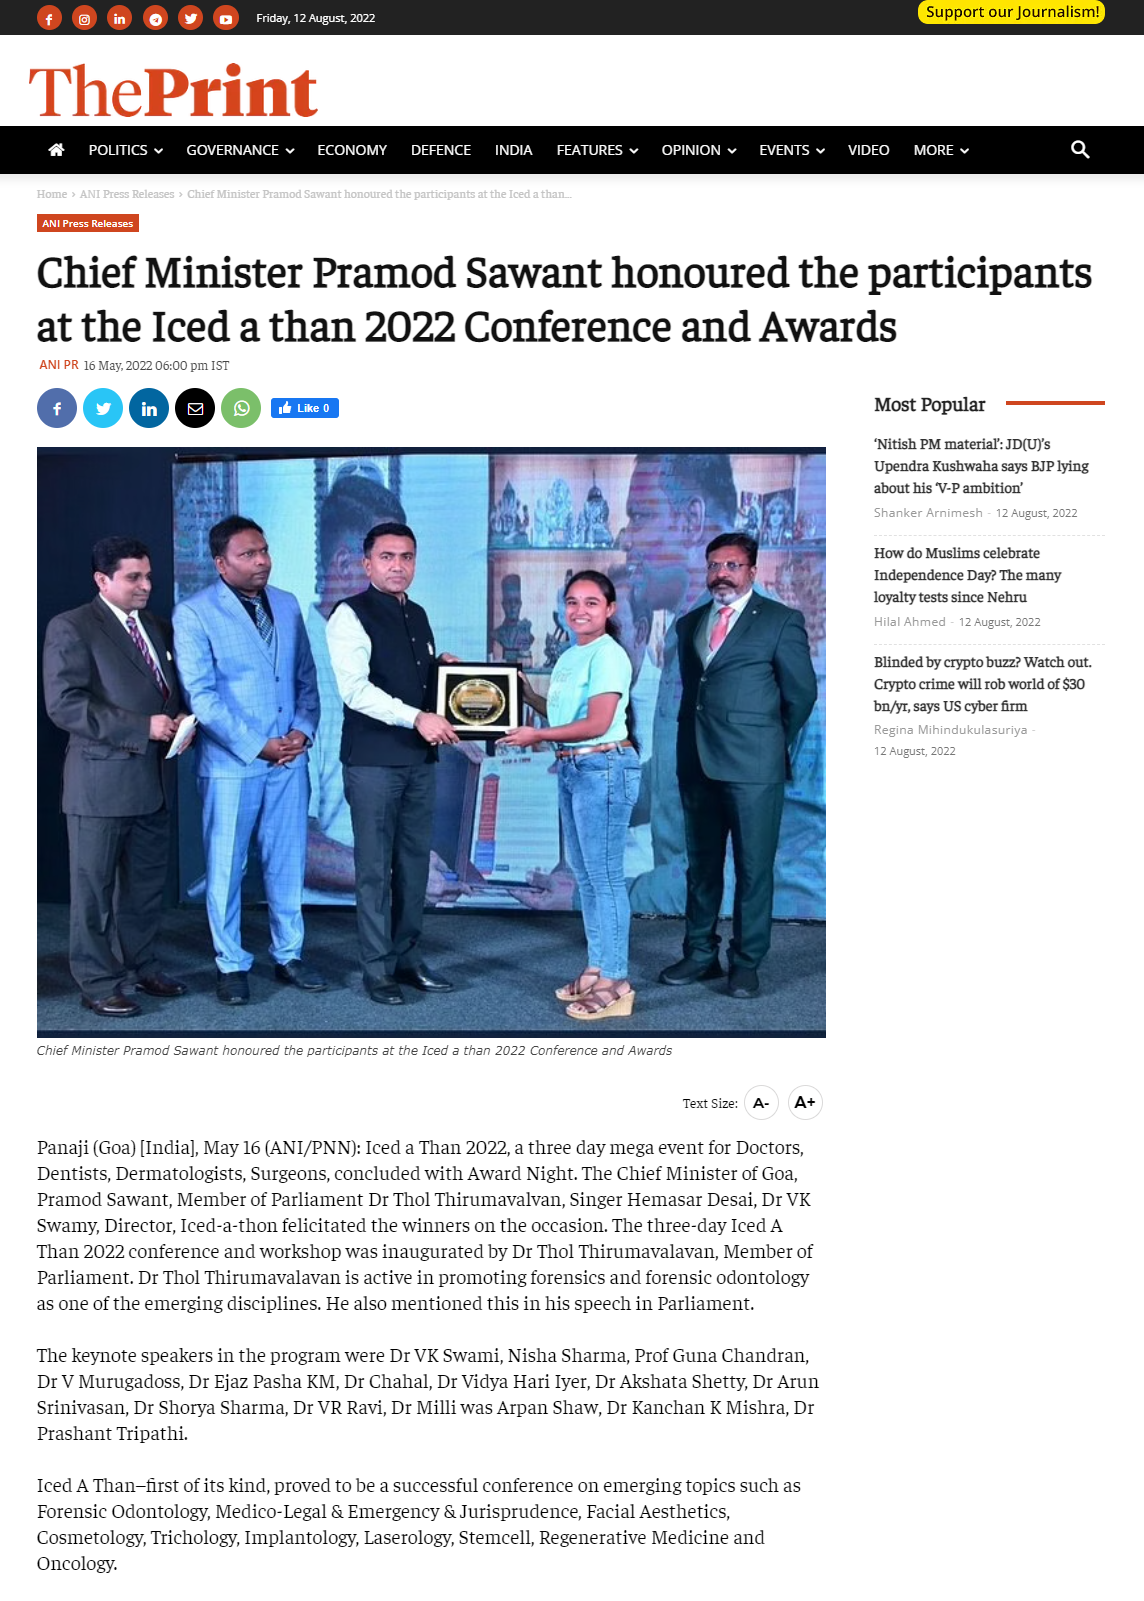 Chief-Minister-Pramod-Sawant-honoured-the-participants-at-the-Iced-a-than-2022-Conference-and-Awards